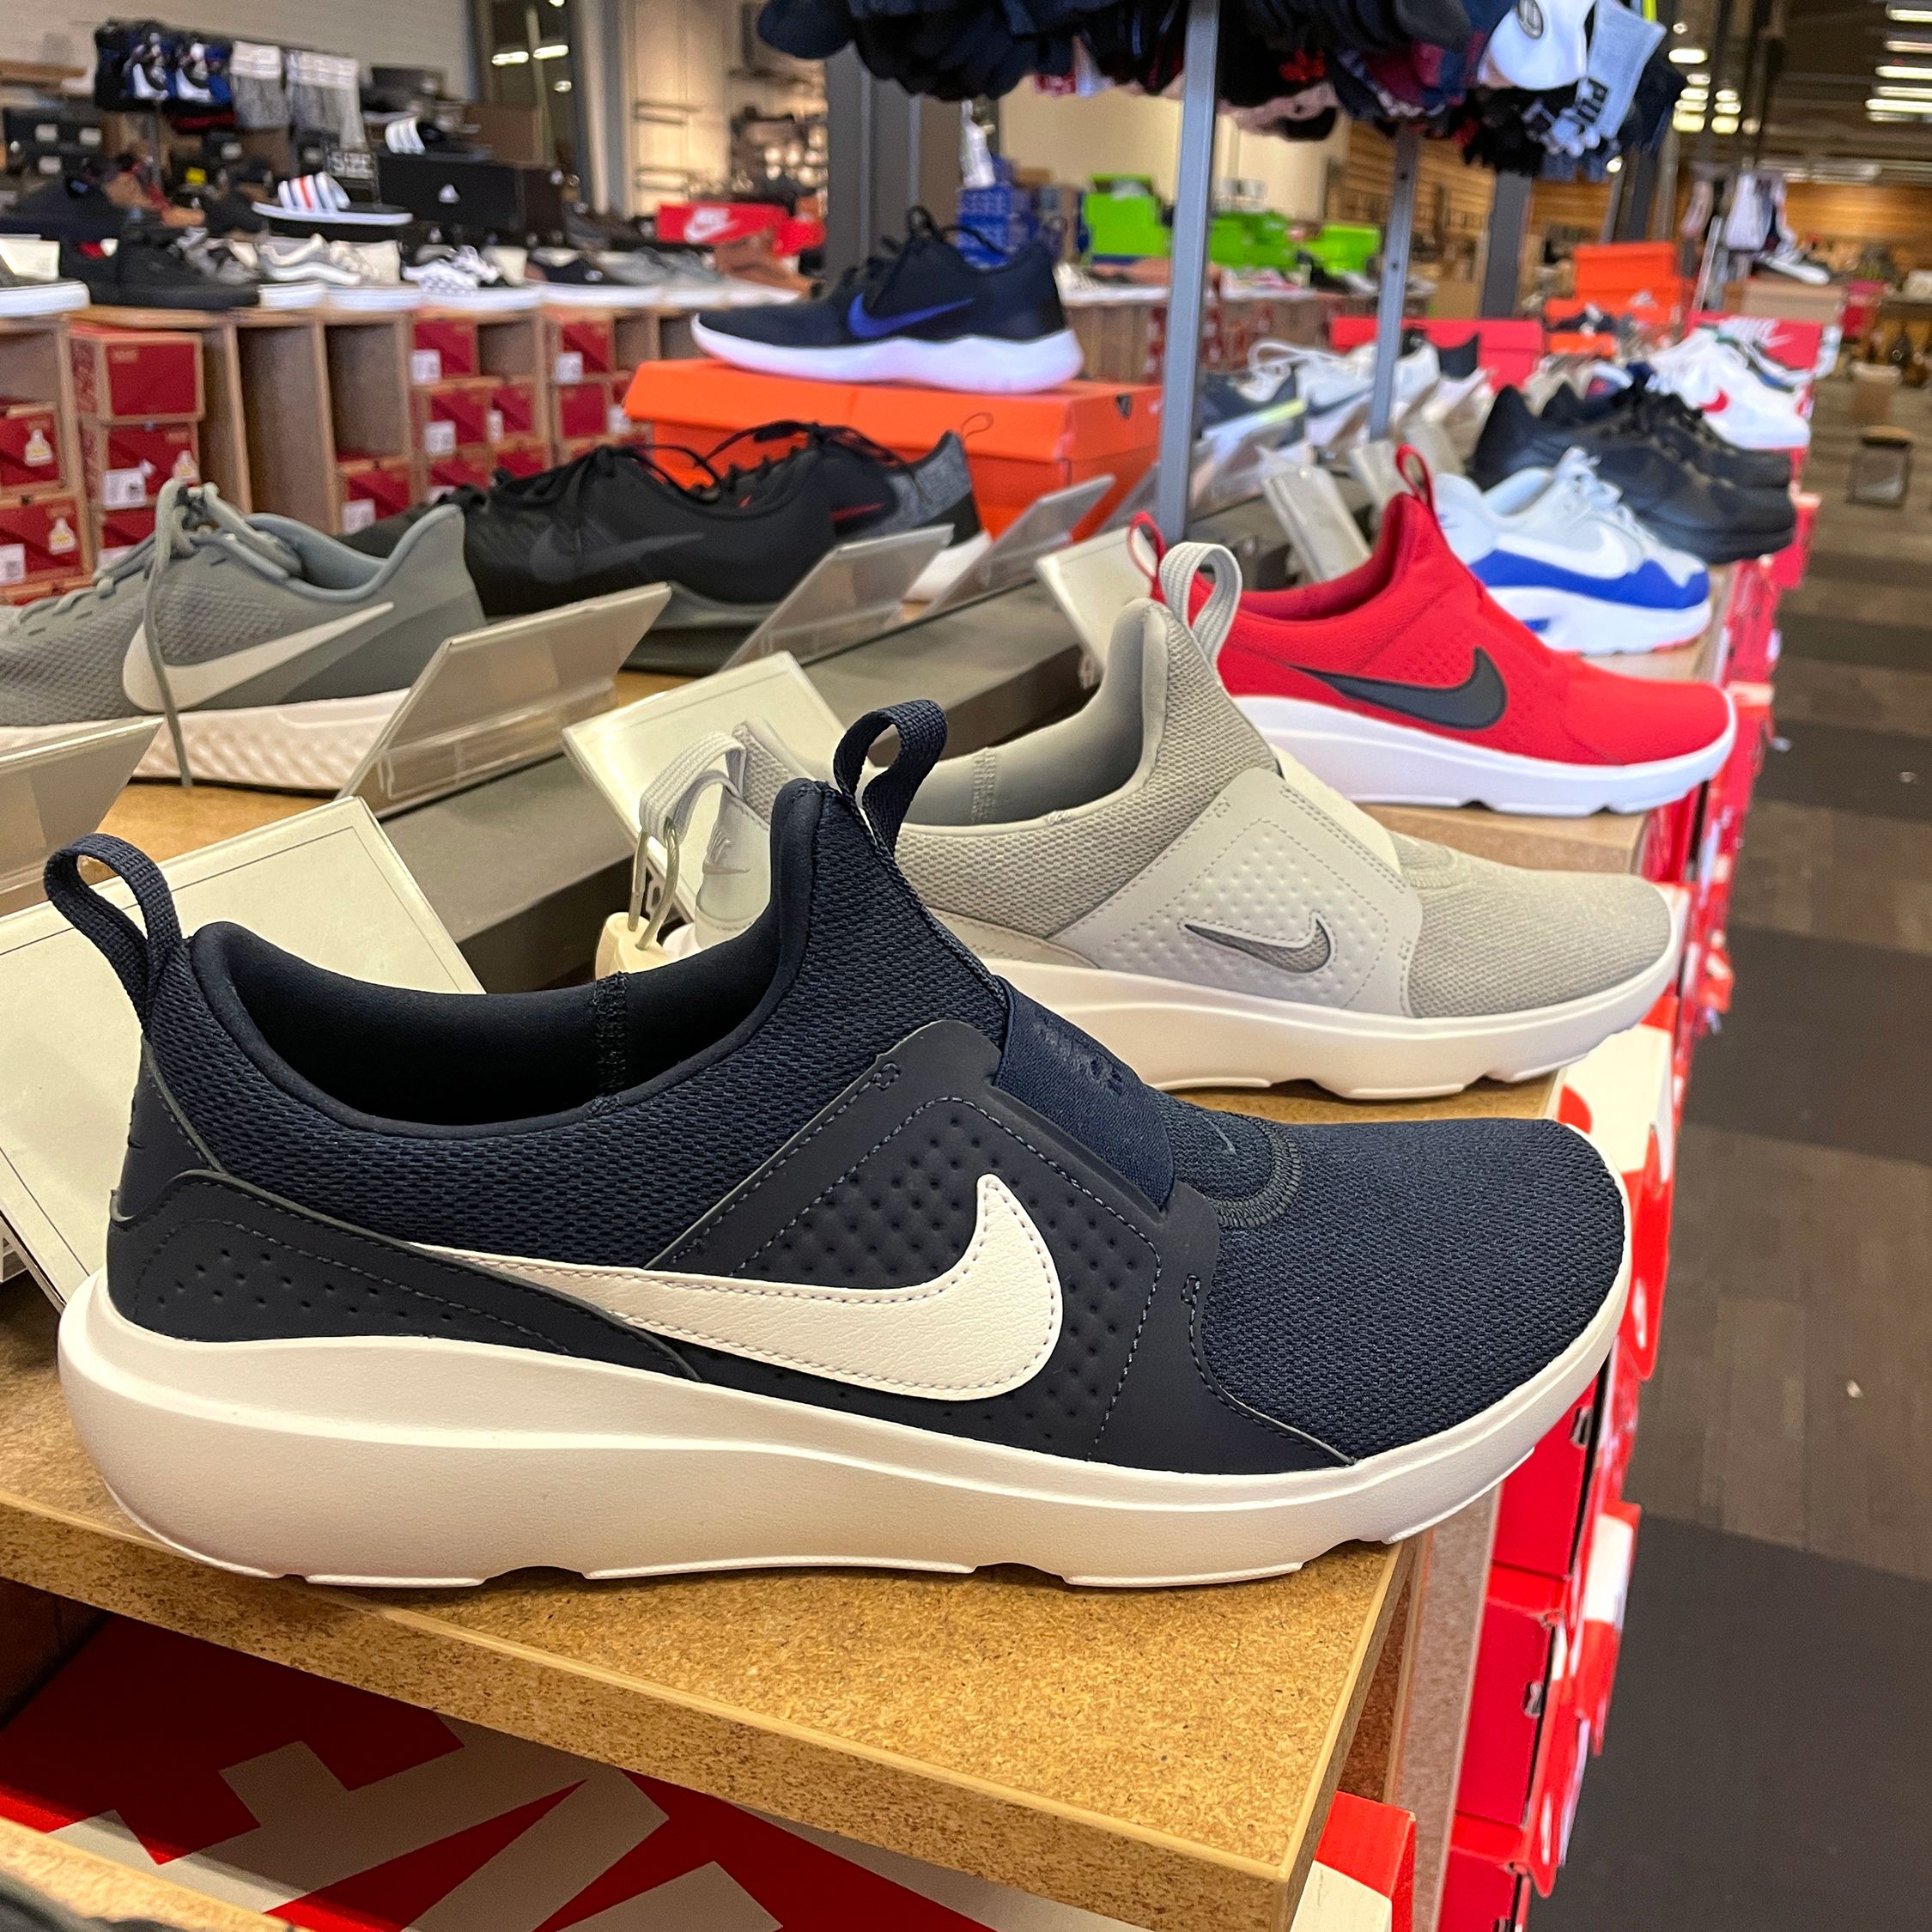 Analytisch Buitenlander Post Nike, Under Armour and others face supply problems in Vietnam | CNN Business